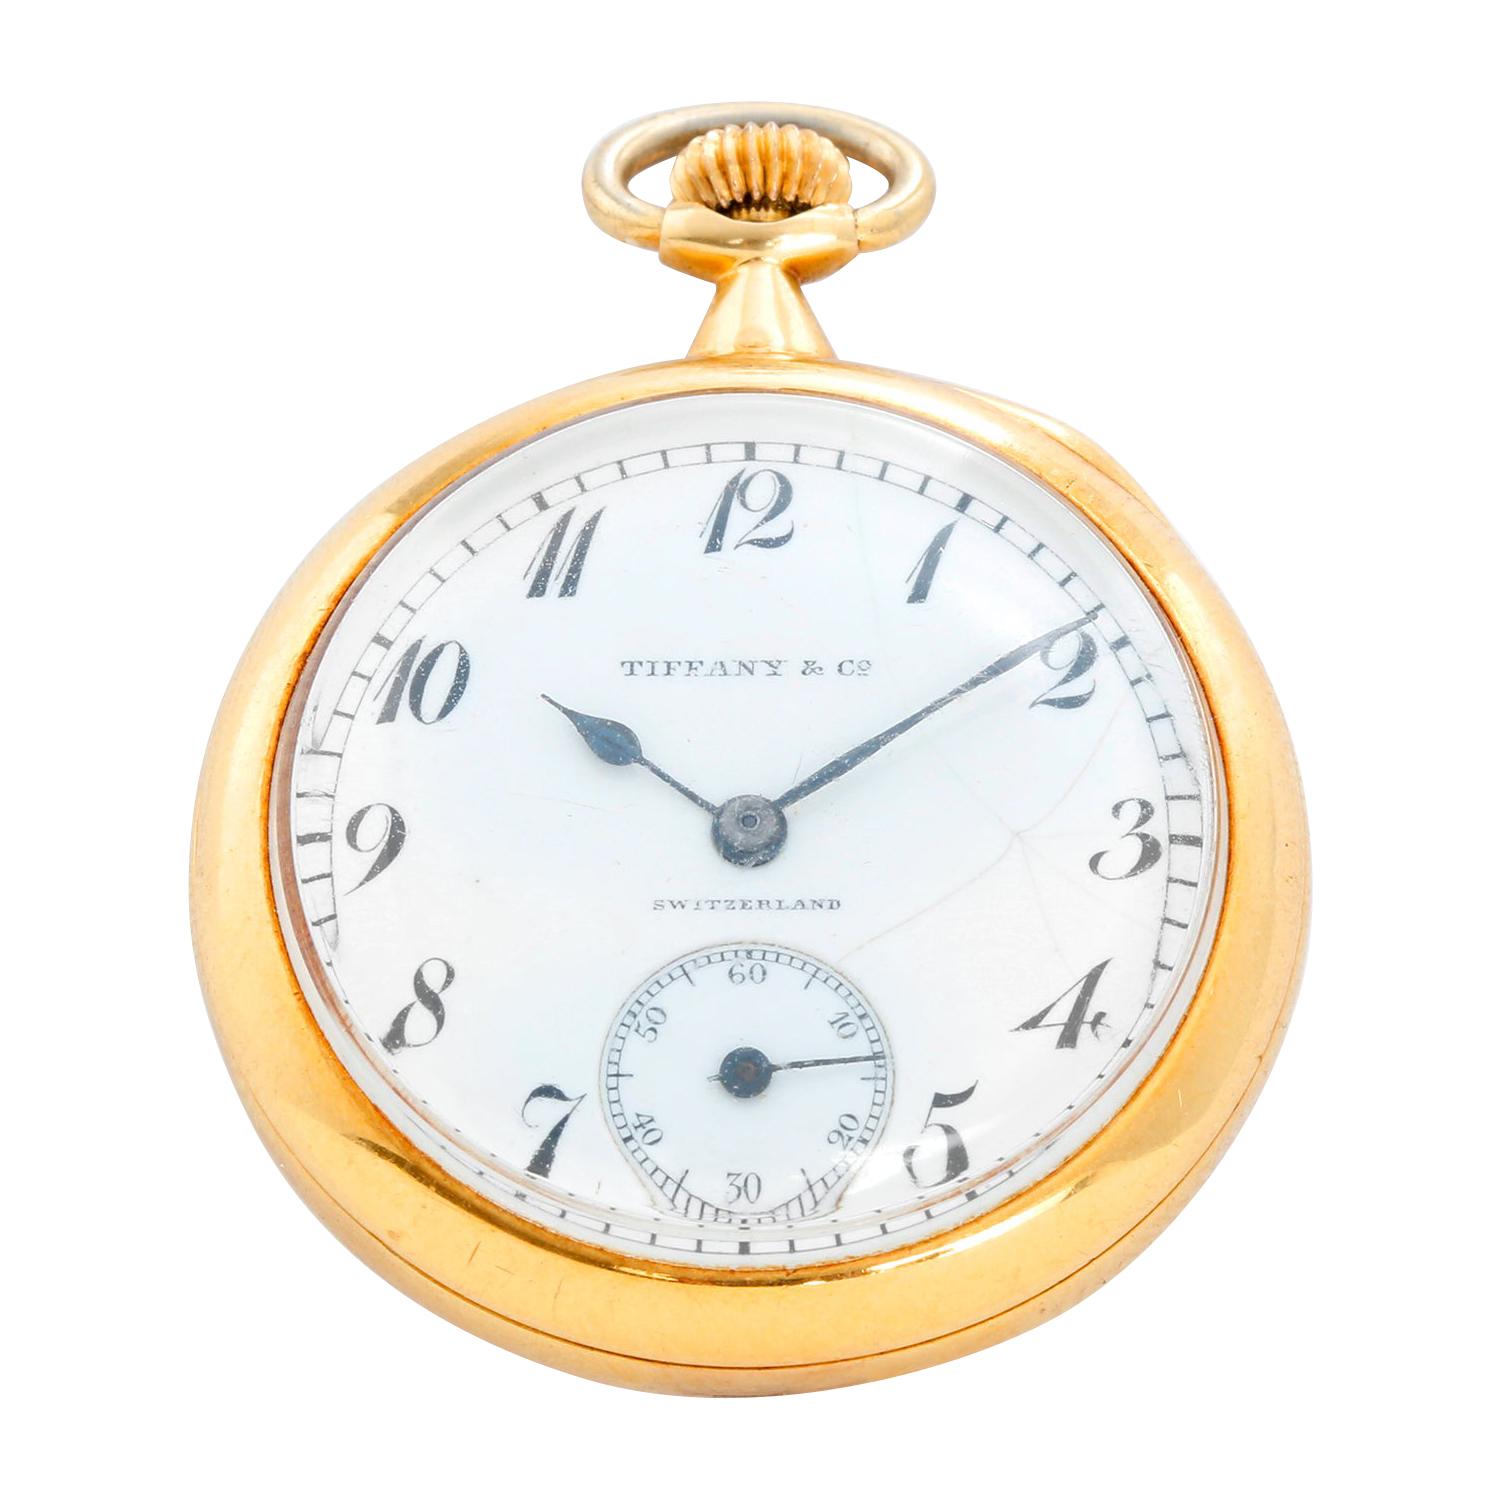 Patek Philippe Pendant Watch for Tiffany & Co.